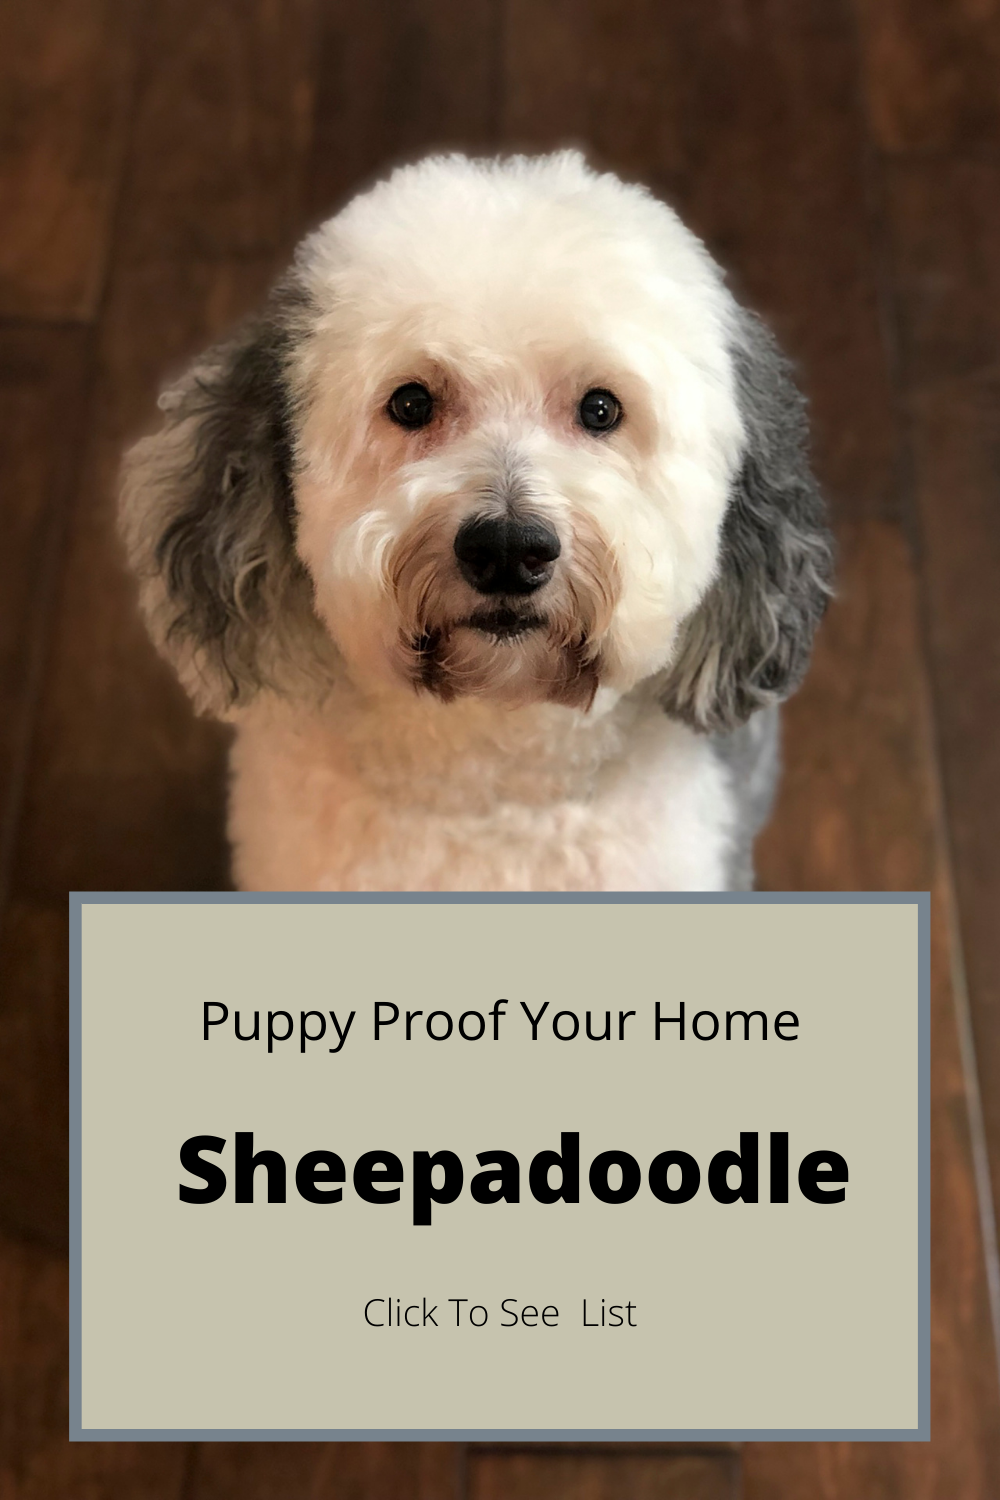 https://doodledogdiaries.com/wp-content/uploads/2021/01/Puppy-Proof-your-Home-Sheepadoodle.png